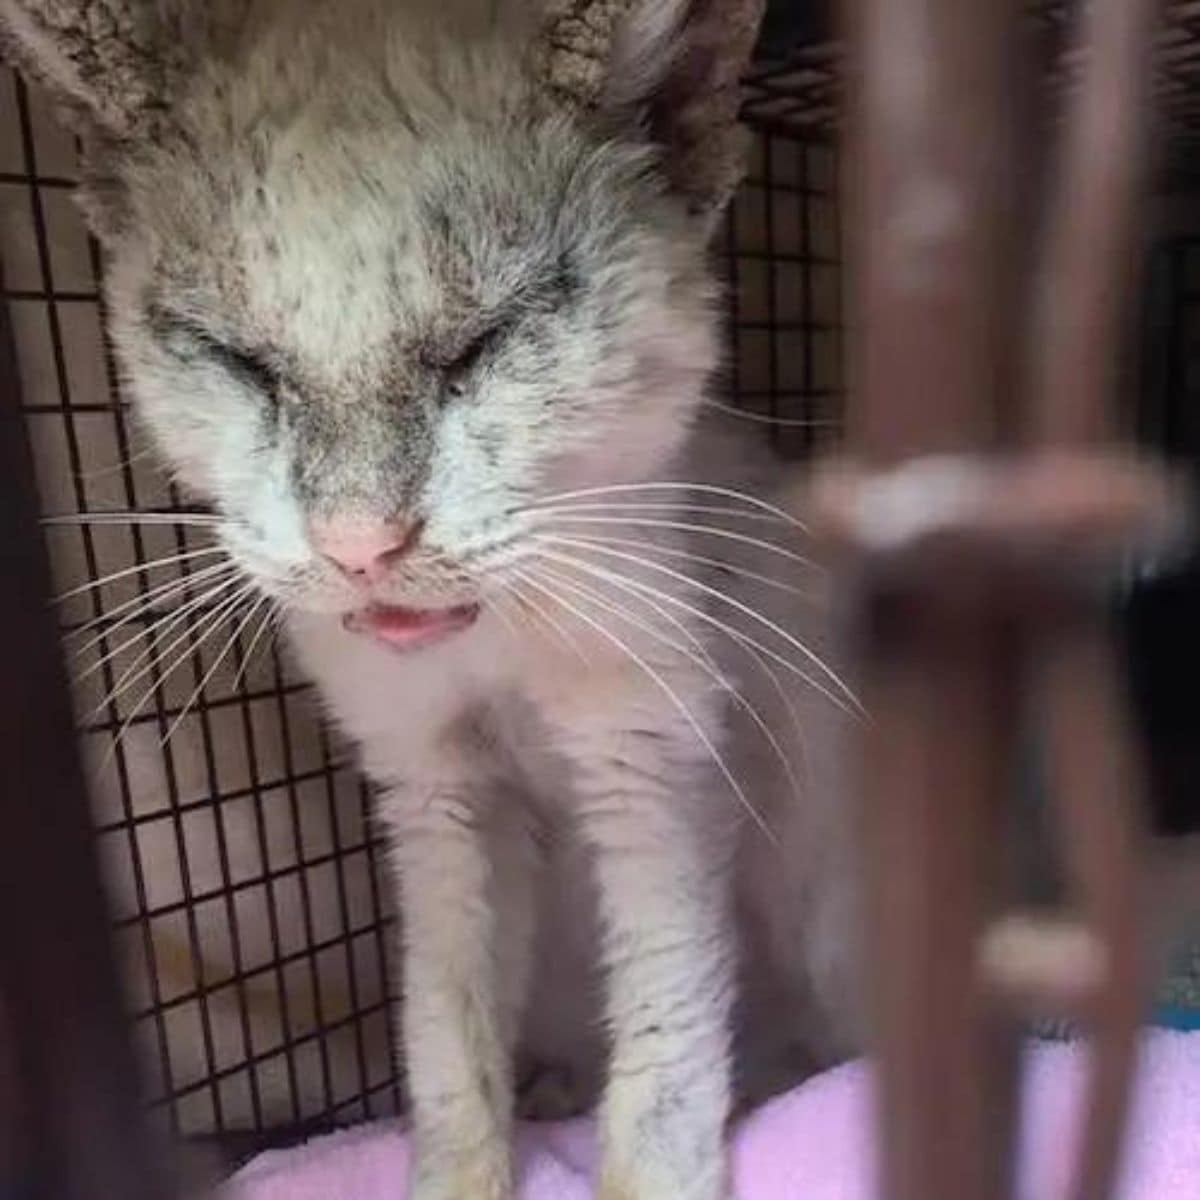 a cat without sight in a cage